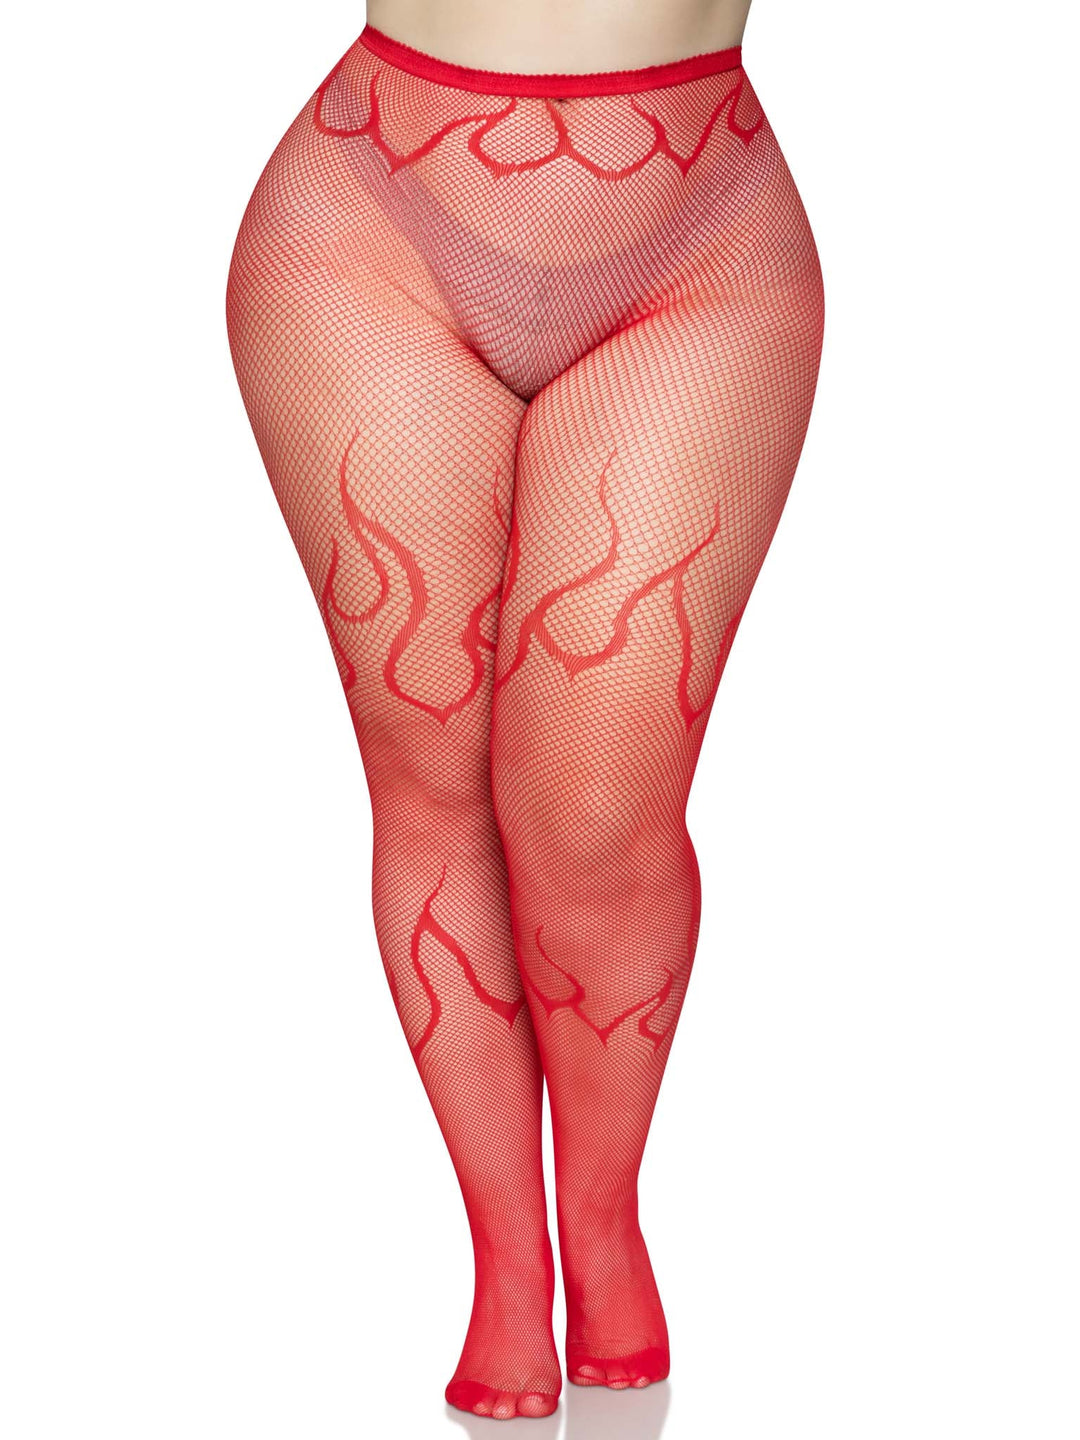 Red Fishnet Pantyhose with Flame Details